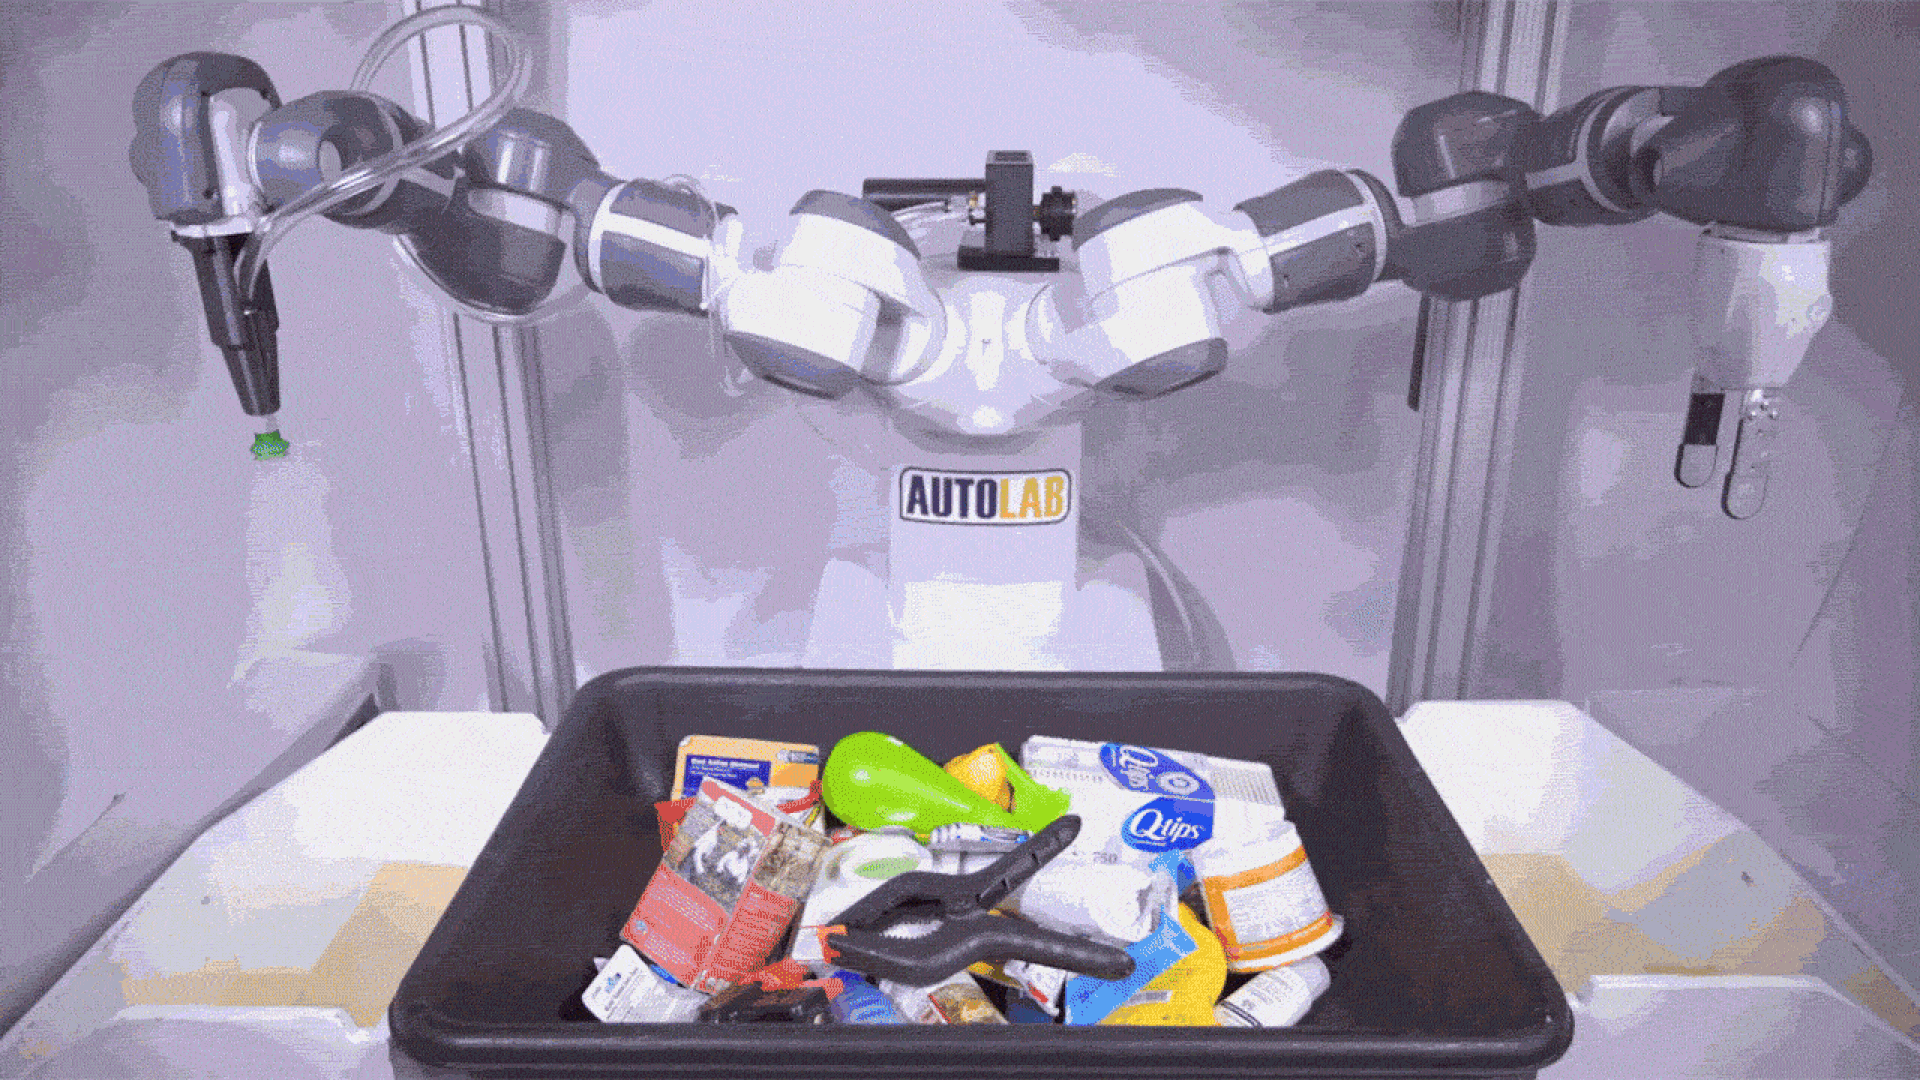 A video clip of two robot arms alternately picking items out of a bin.